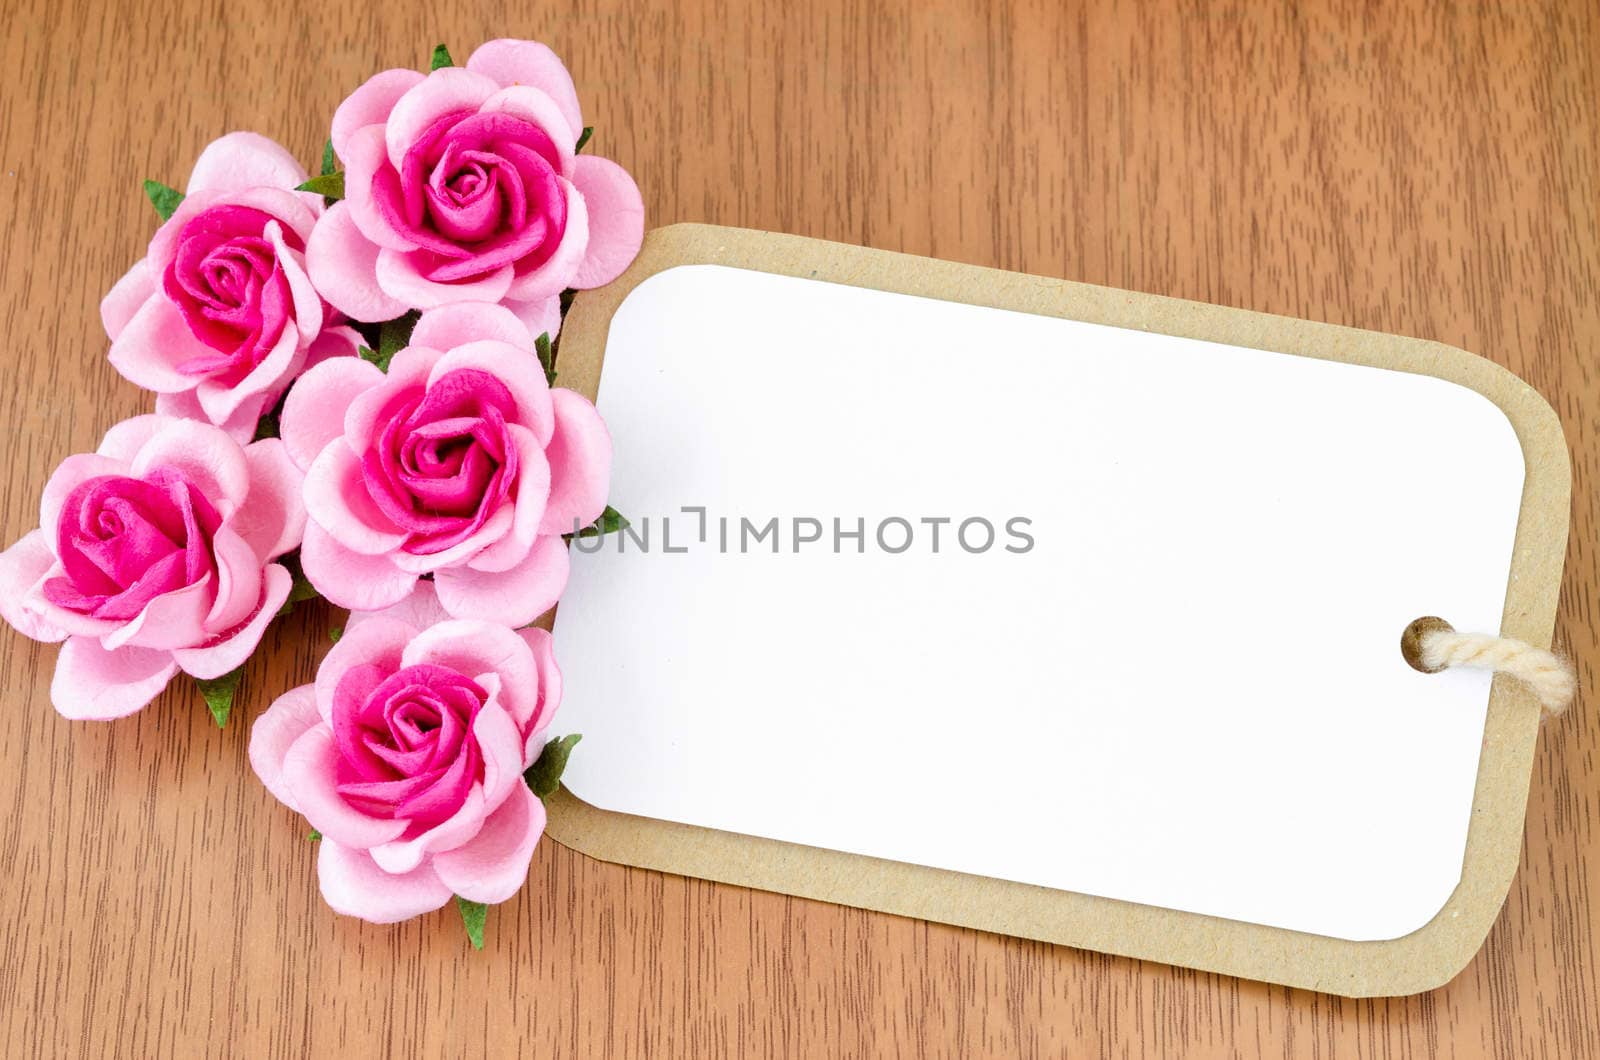 Blank paper tag and pink roses on wooden background for your text.